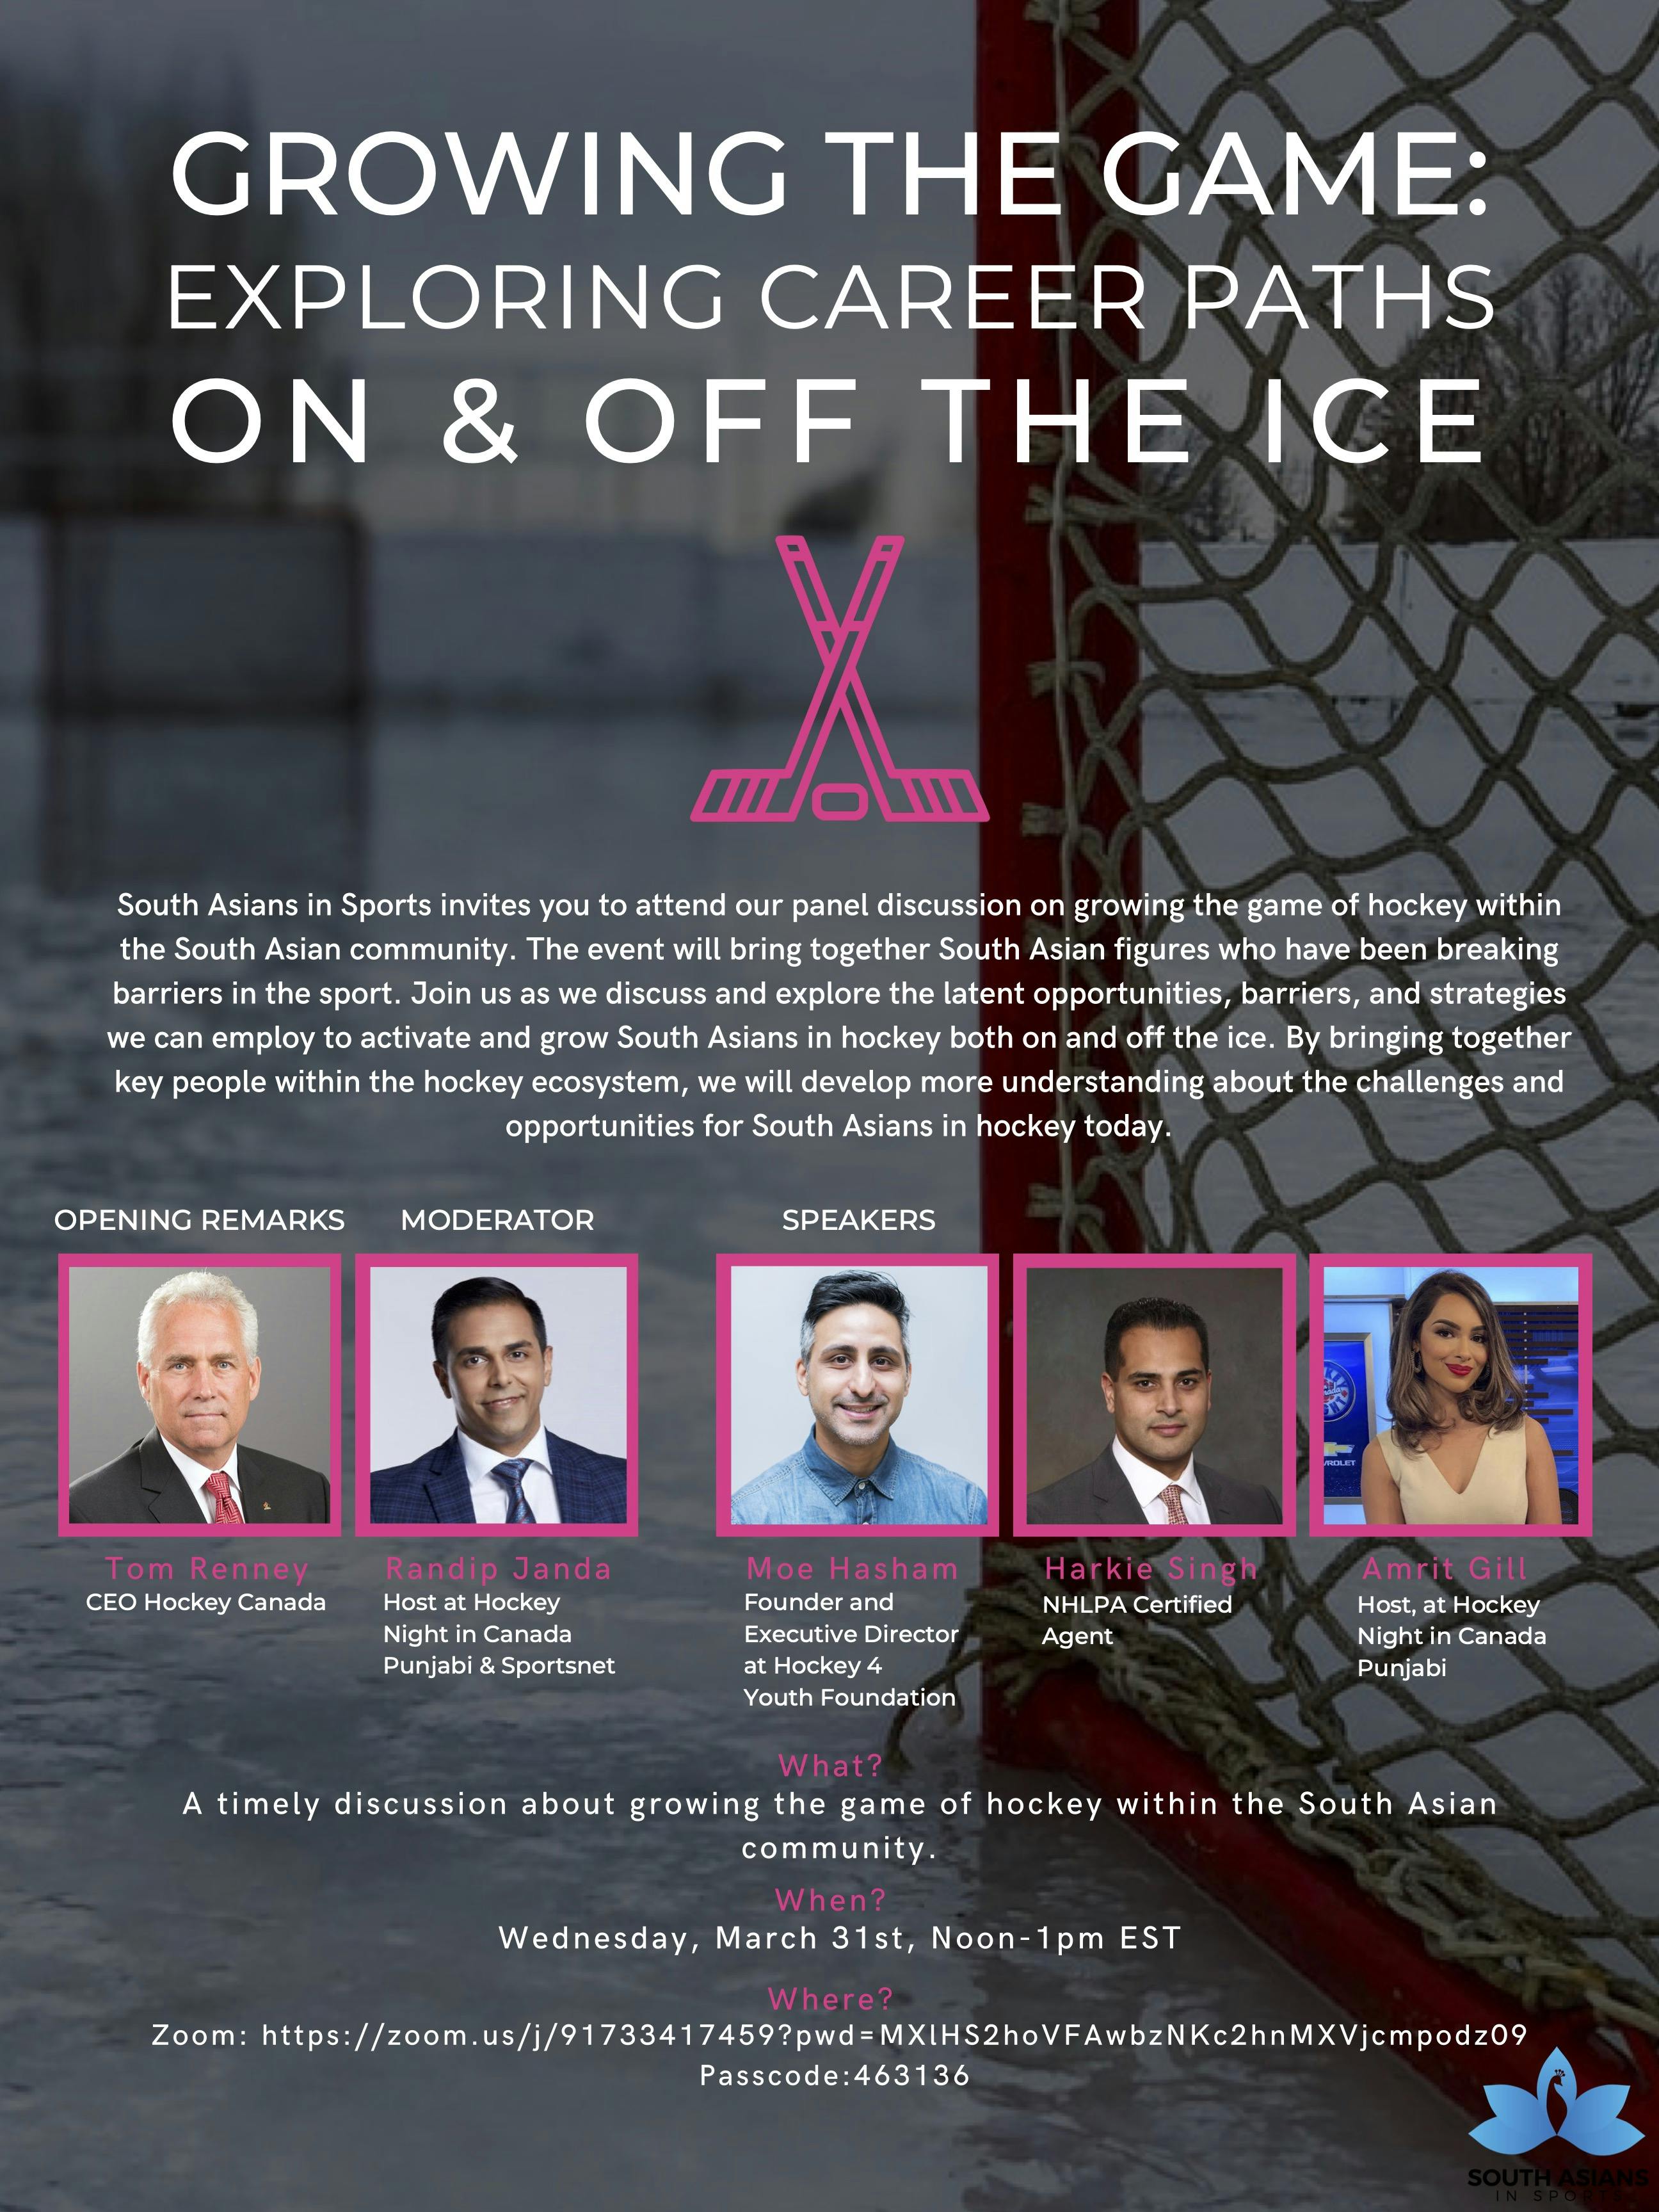 Growing the Game: Exploring Career Paths On & Off The Ice